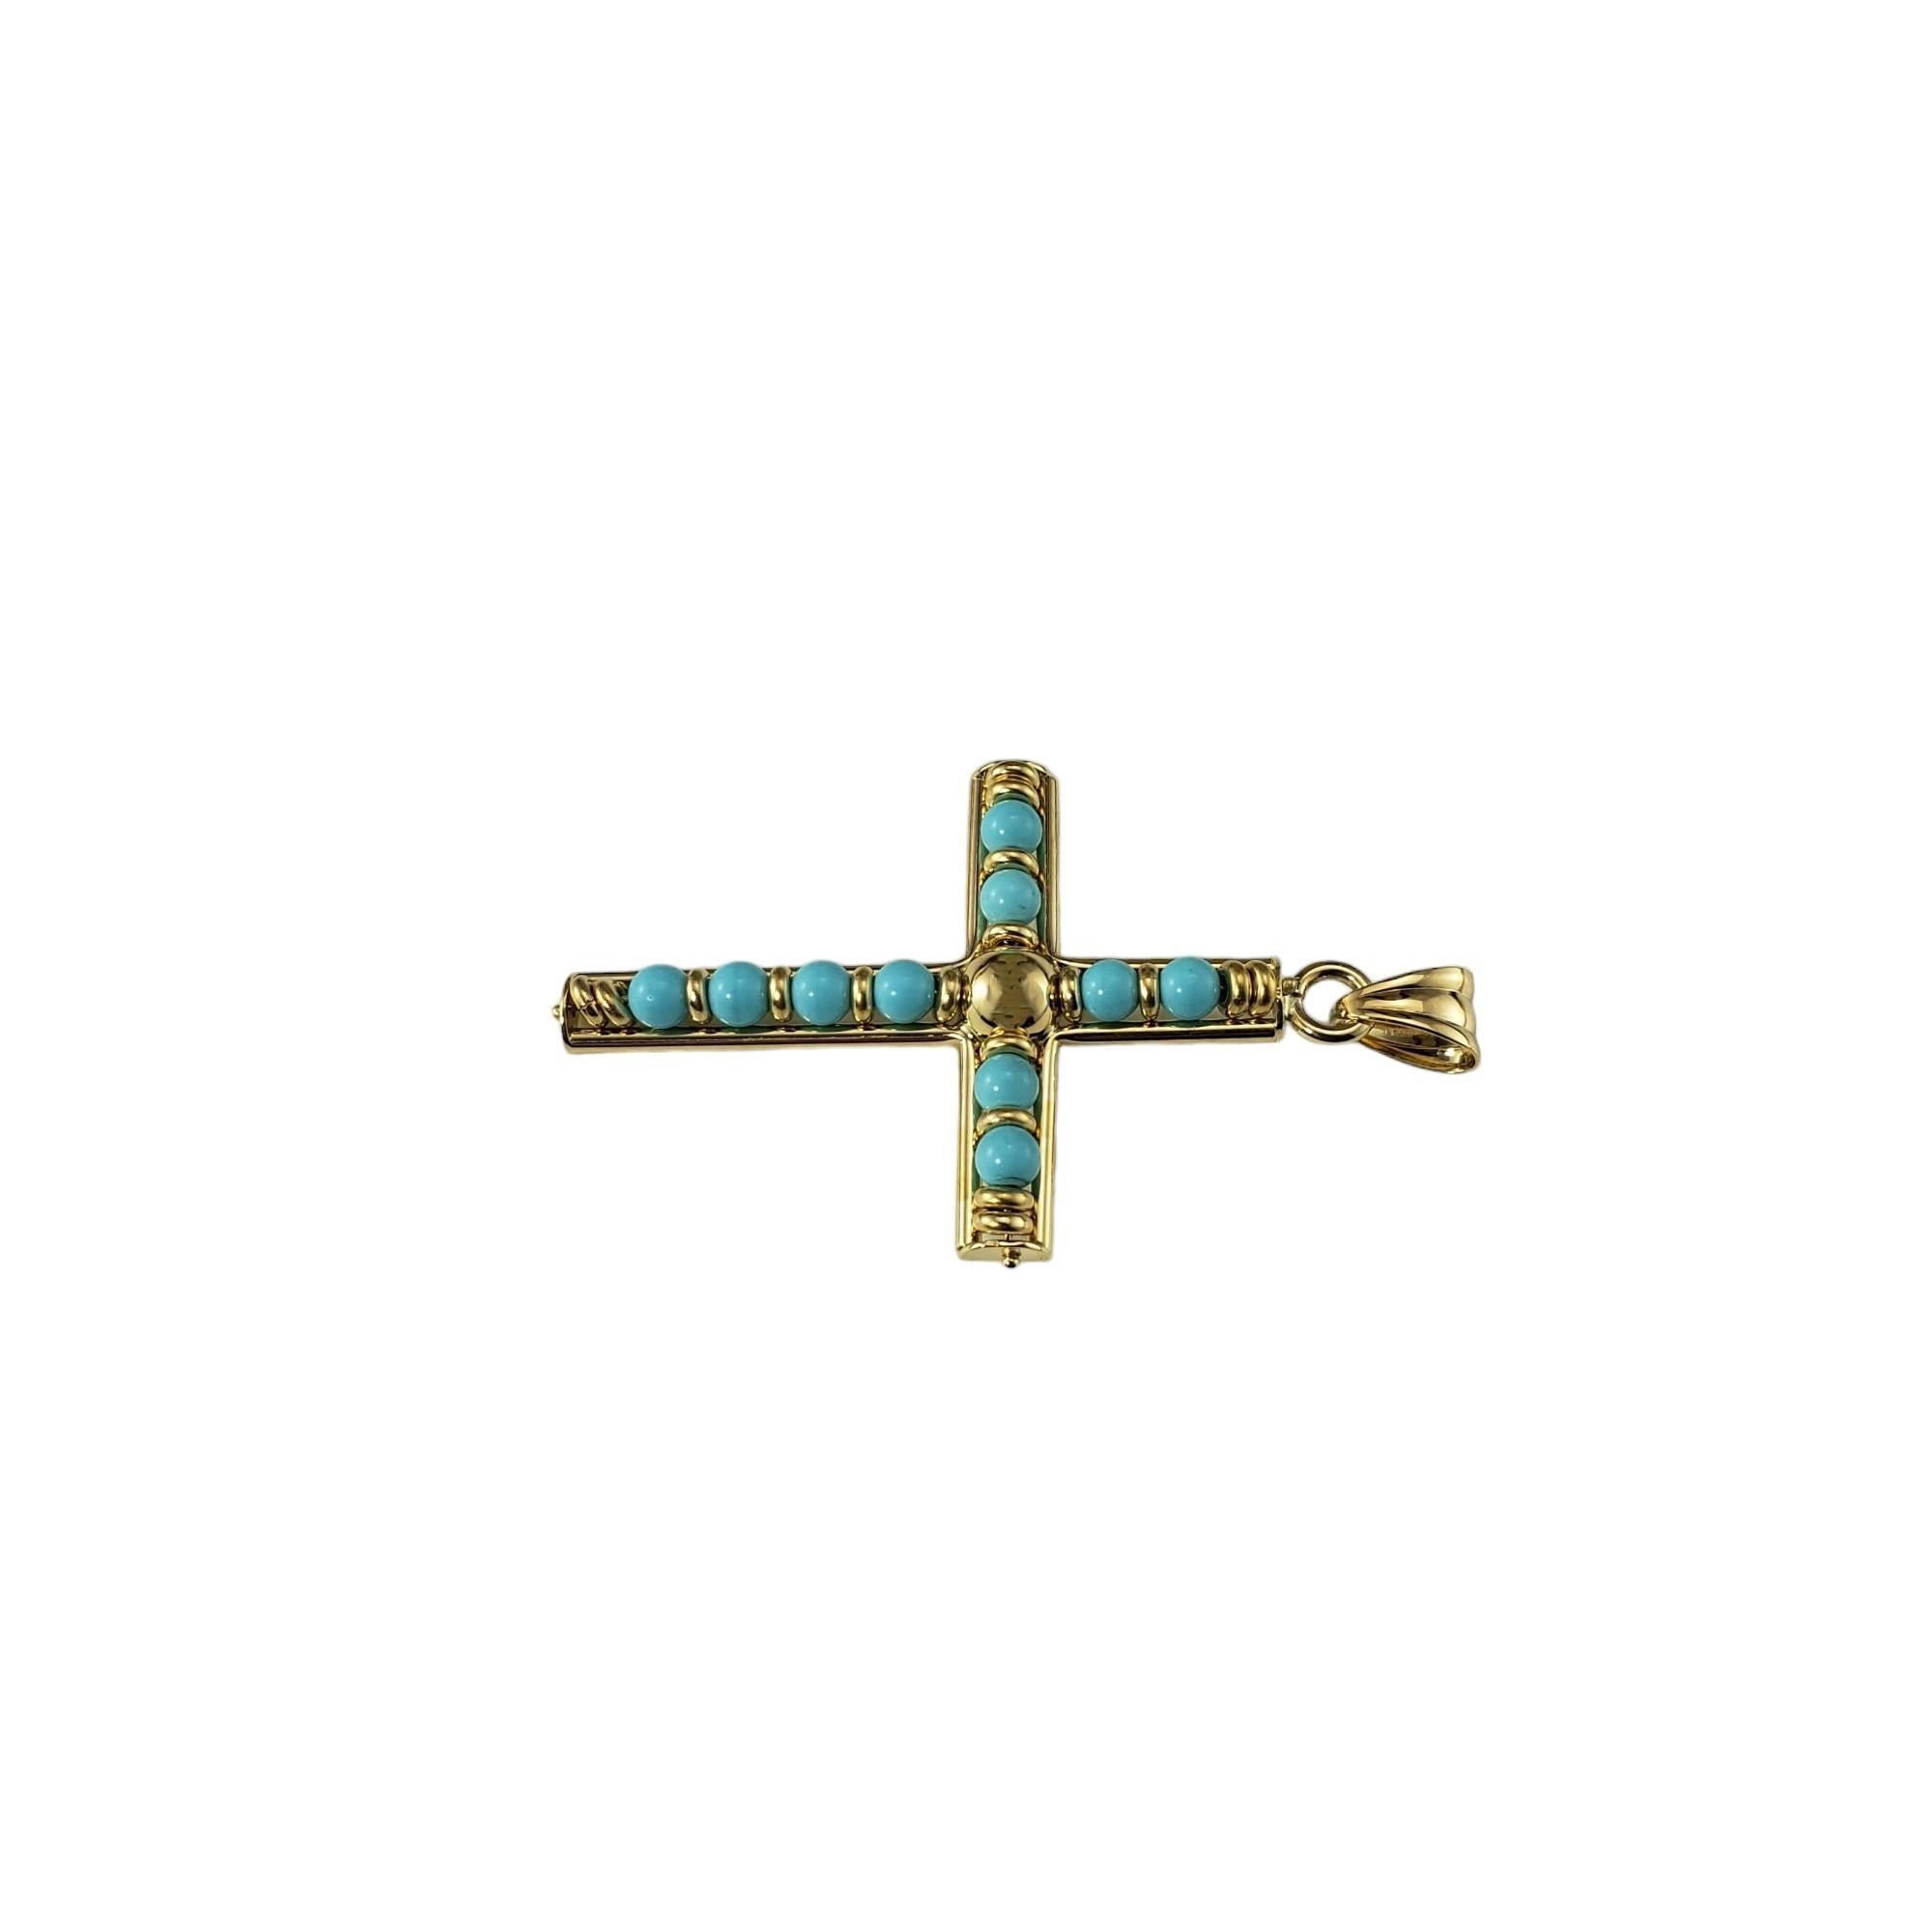 18 Karat Yellow Gold and Turquoise Cross Pendant

This elegant cross pendant features 10 round turquoise stones (3 mm each) set in beautifully detailed 14K yellow gold.

Size: 44.5 mm xx 32 mm

Stamped: Italy 18KT

Weight: 3.0 dwt./ 4.7 gr.

*Chain